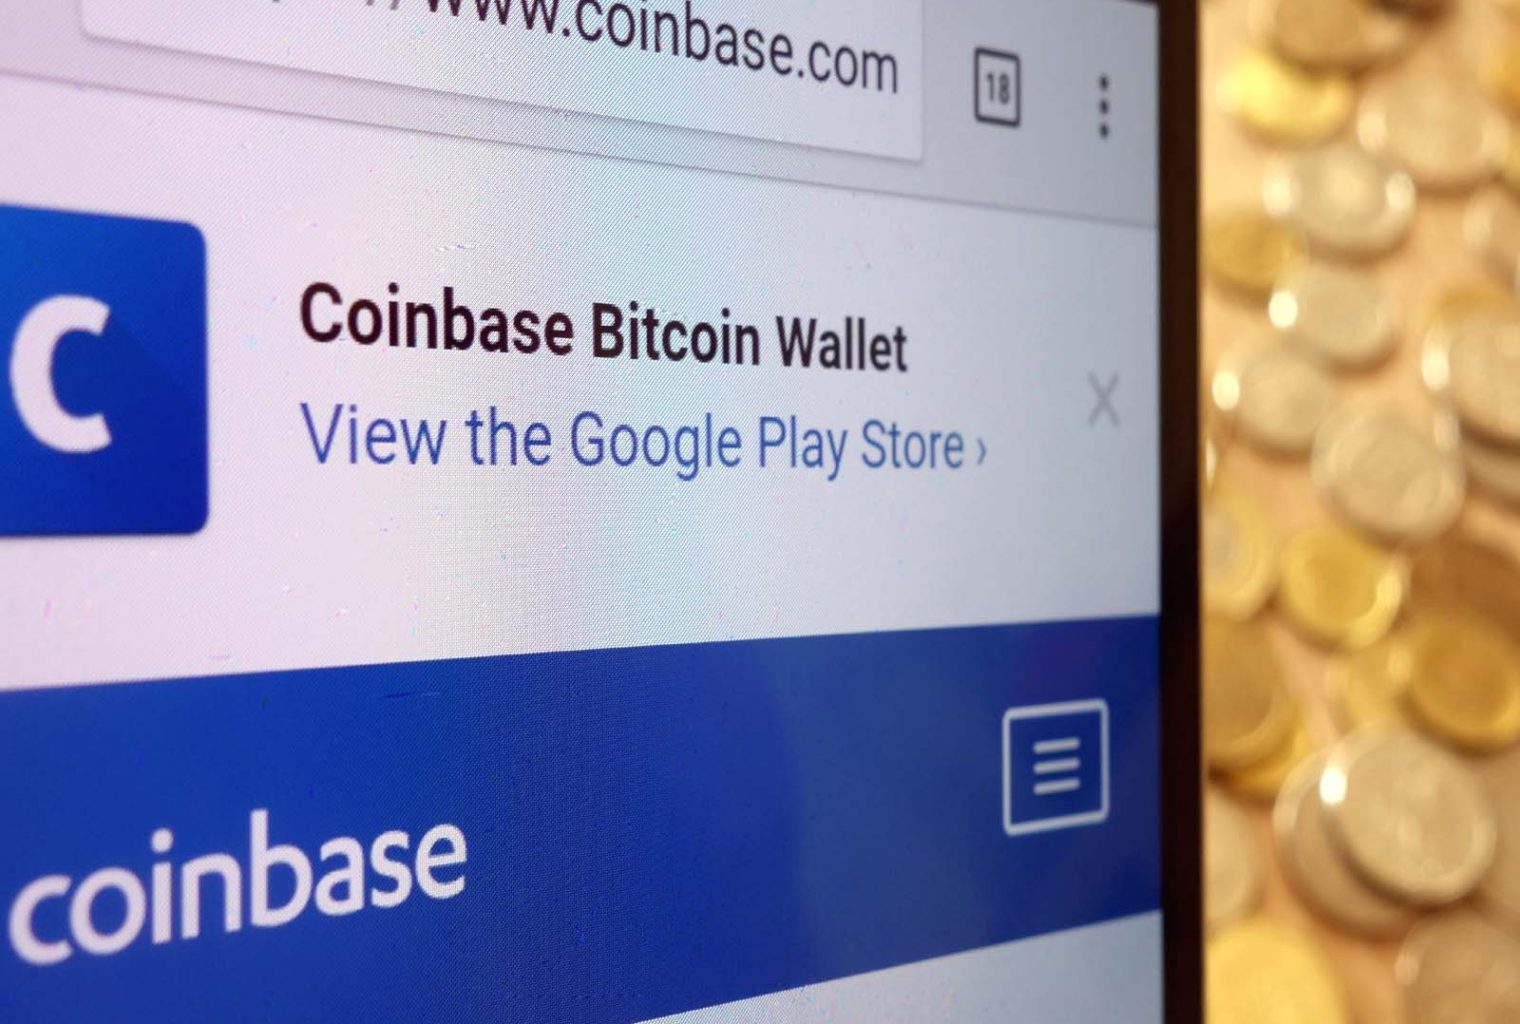 eGifter Only Accepts Bitcoin Payments From Coinbase Wallet Owners